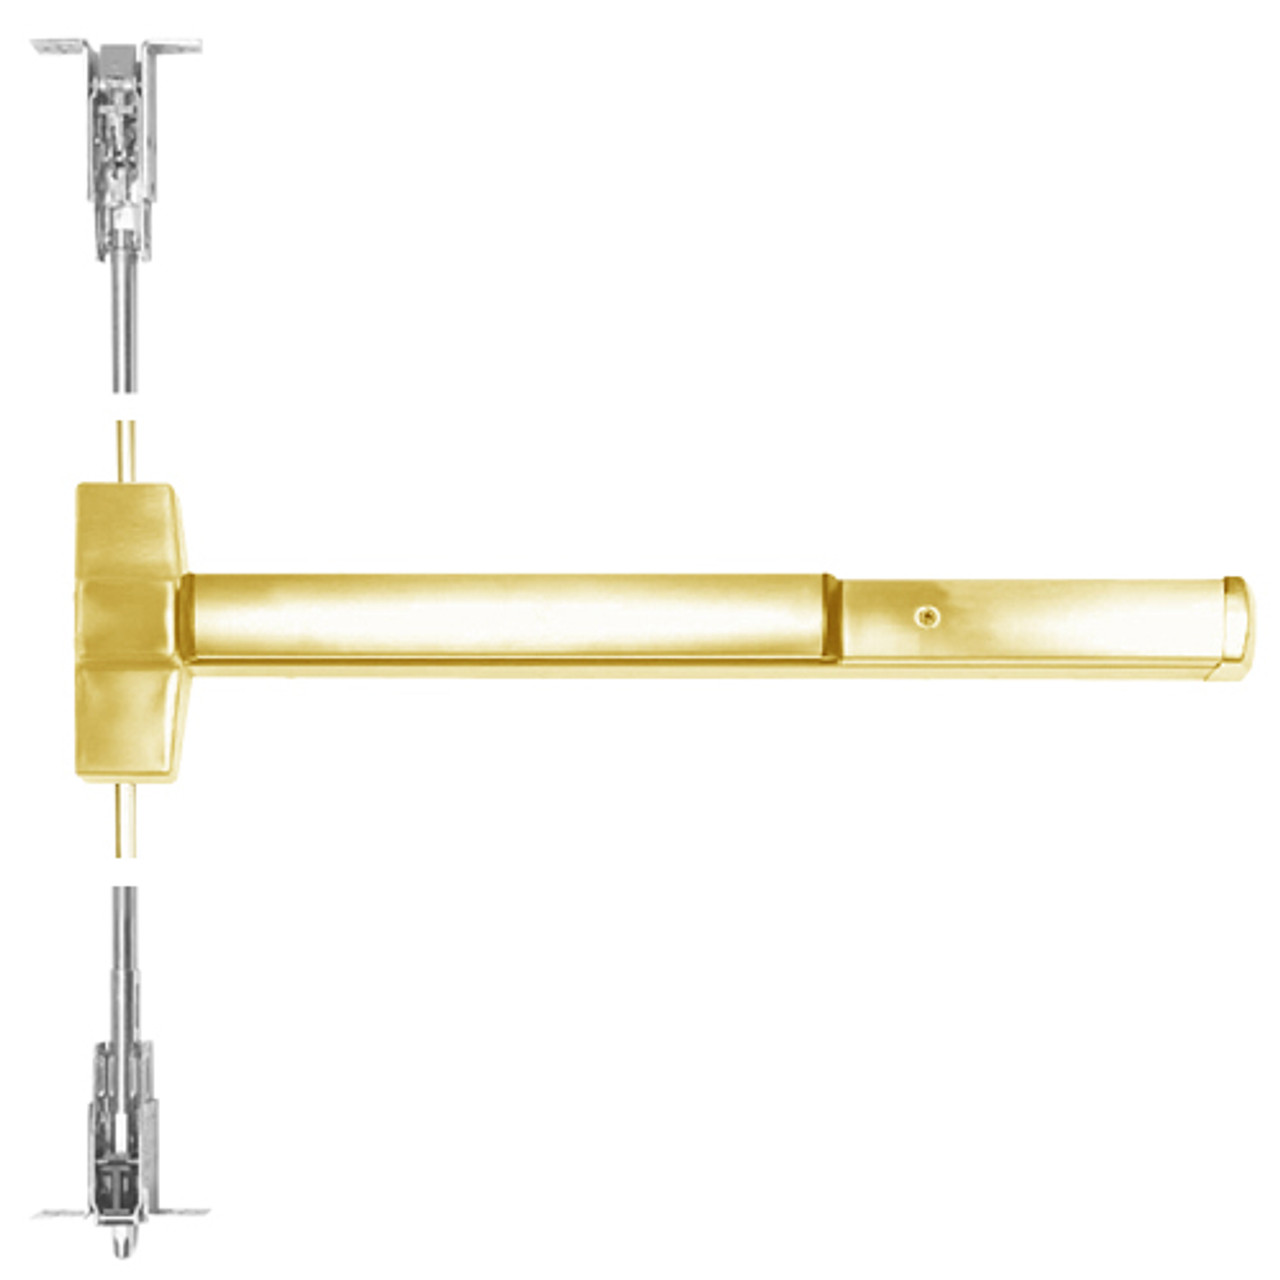 ED5860-605 Corbin ED5800 Series Non Fire Rated Concealed Vertical Rod Device in Bright Brass Finish